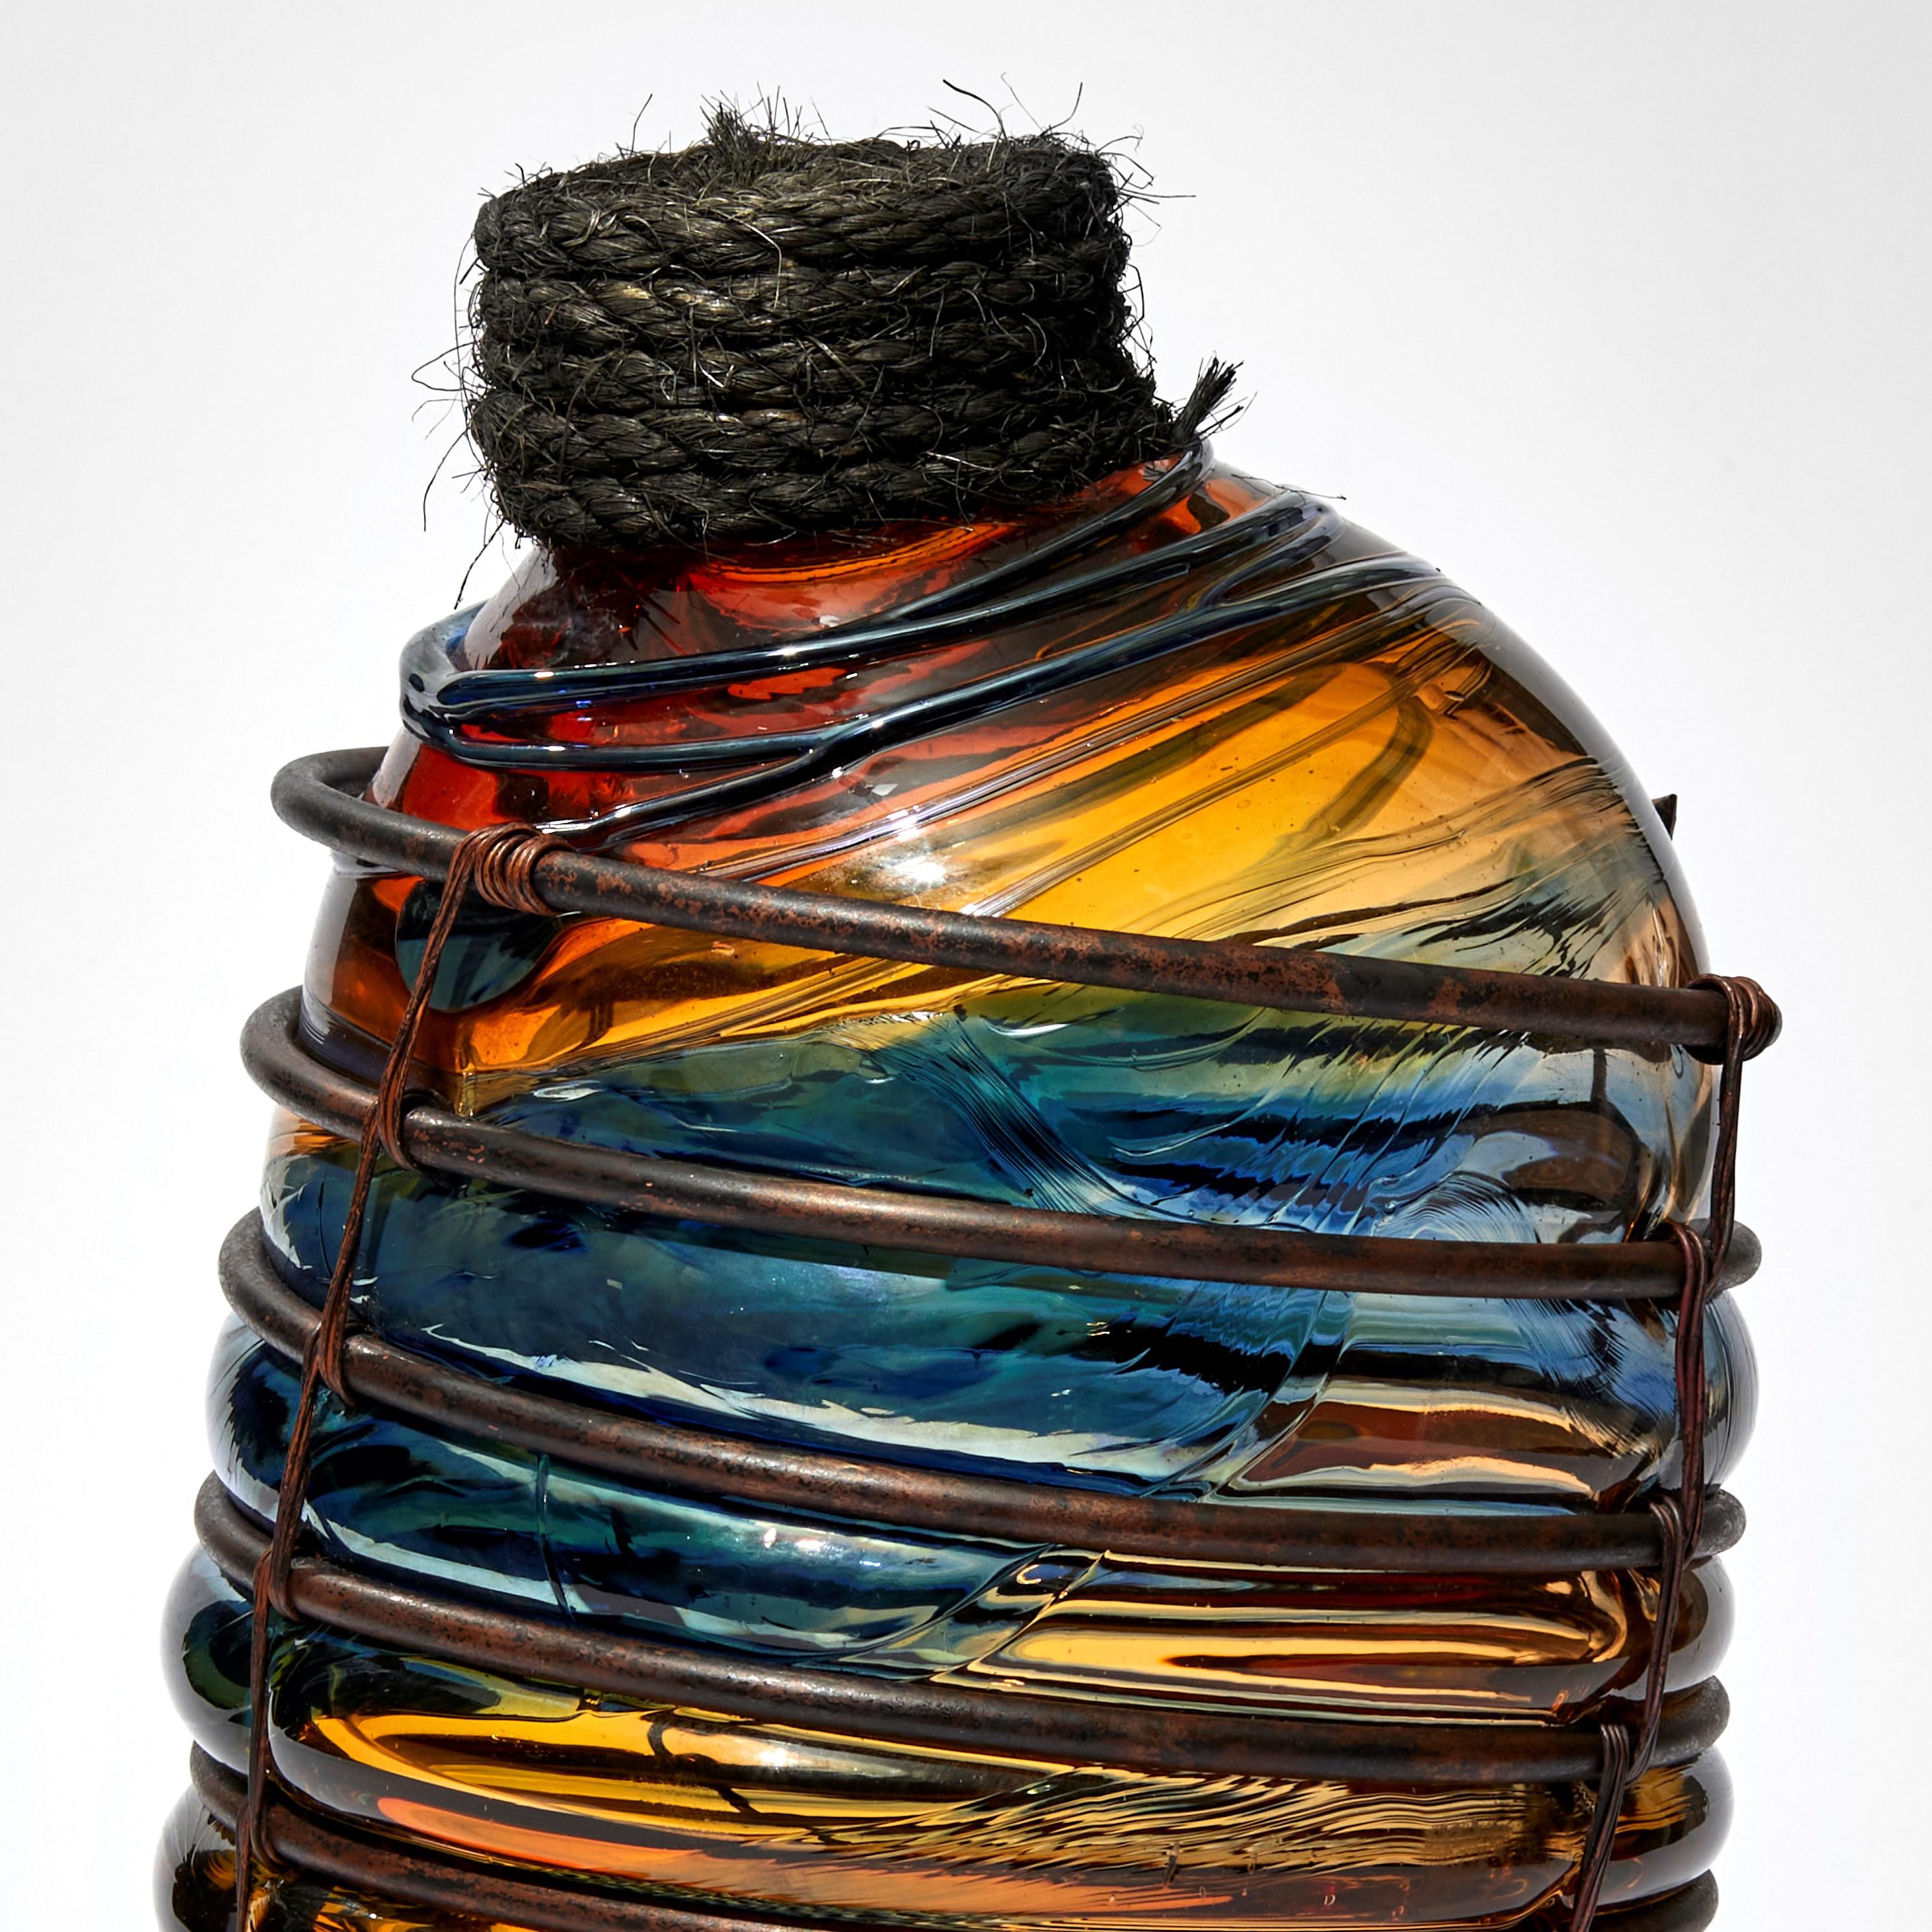 Organic Modern Under the Influence V, a Unique Glass, Copper & Rope Sculpture by Chris Day For Sale